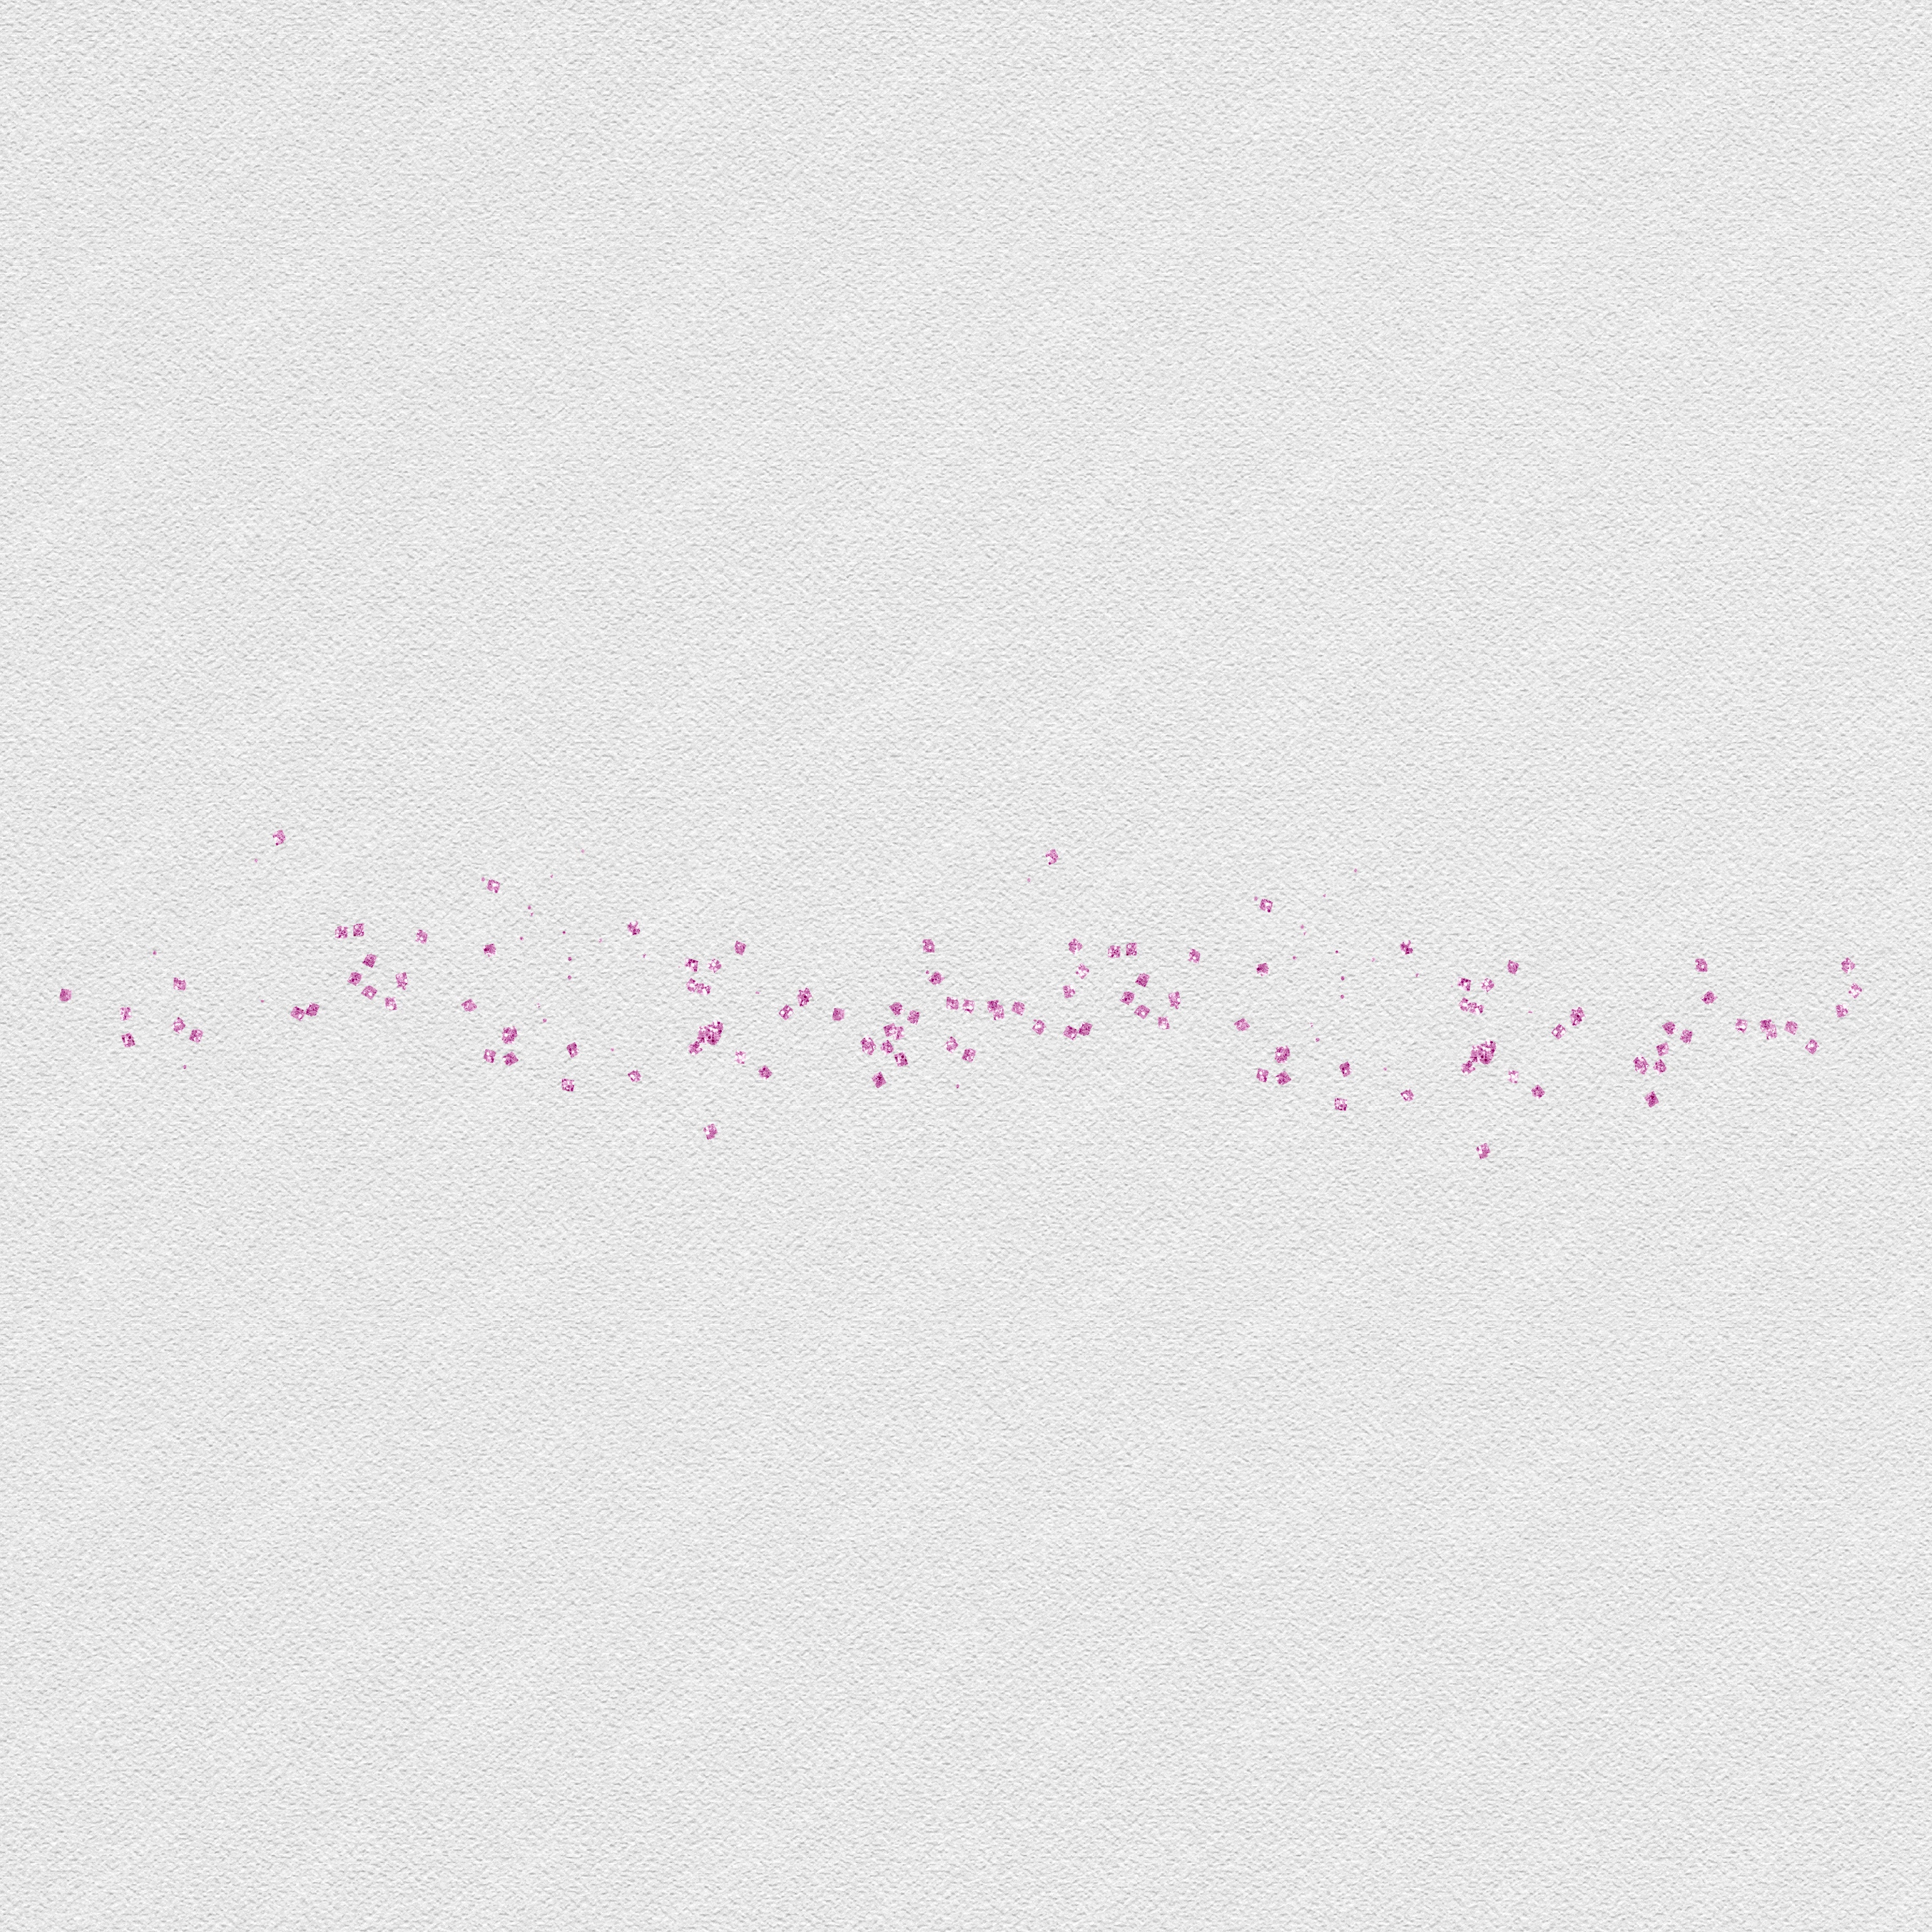 70 Lilac Glitter Particles Set PNG Overlay Images